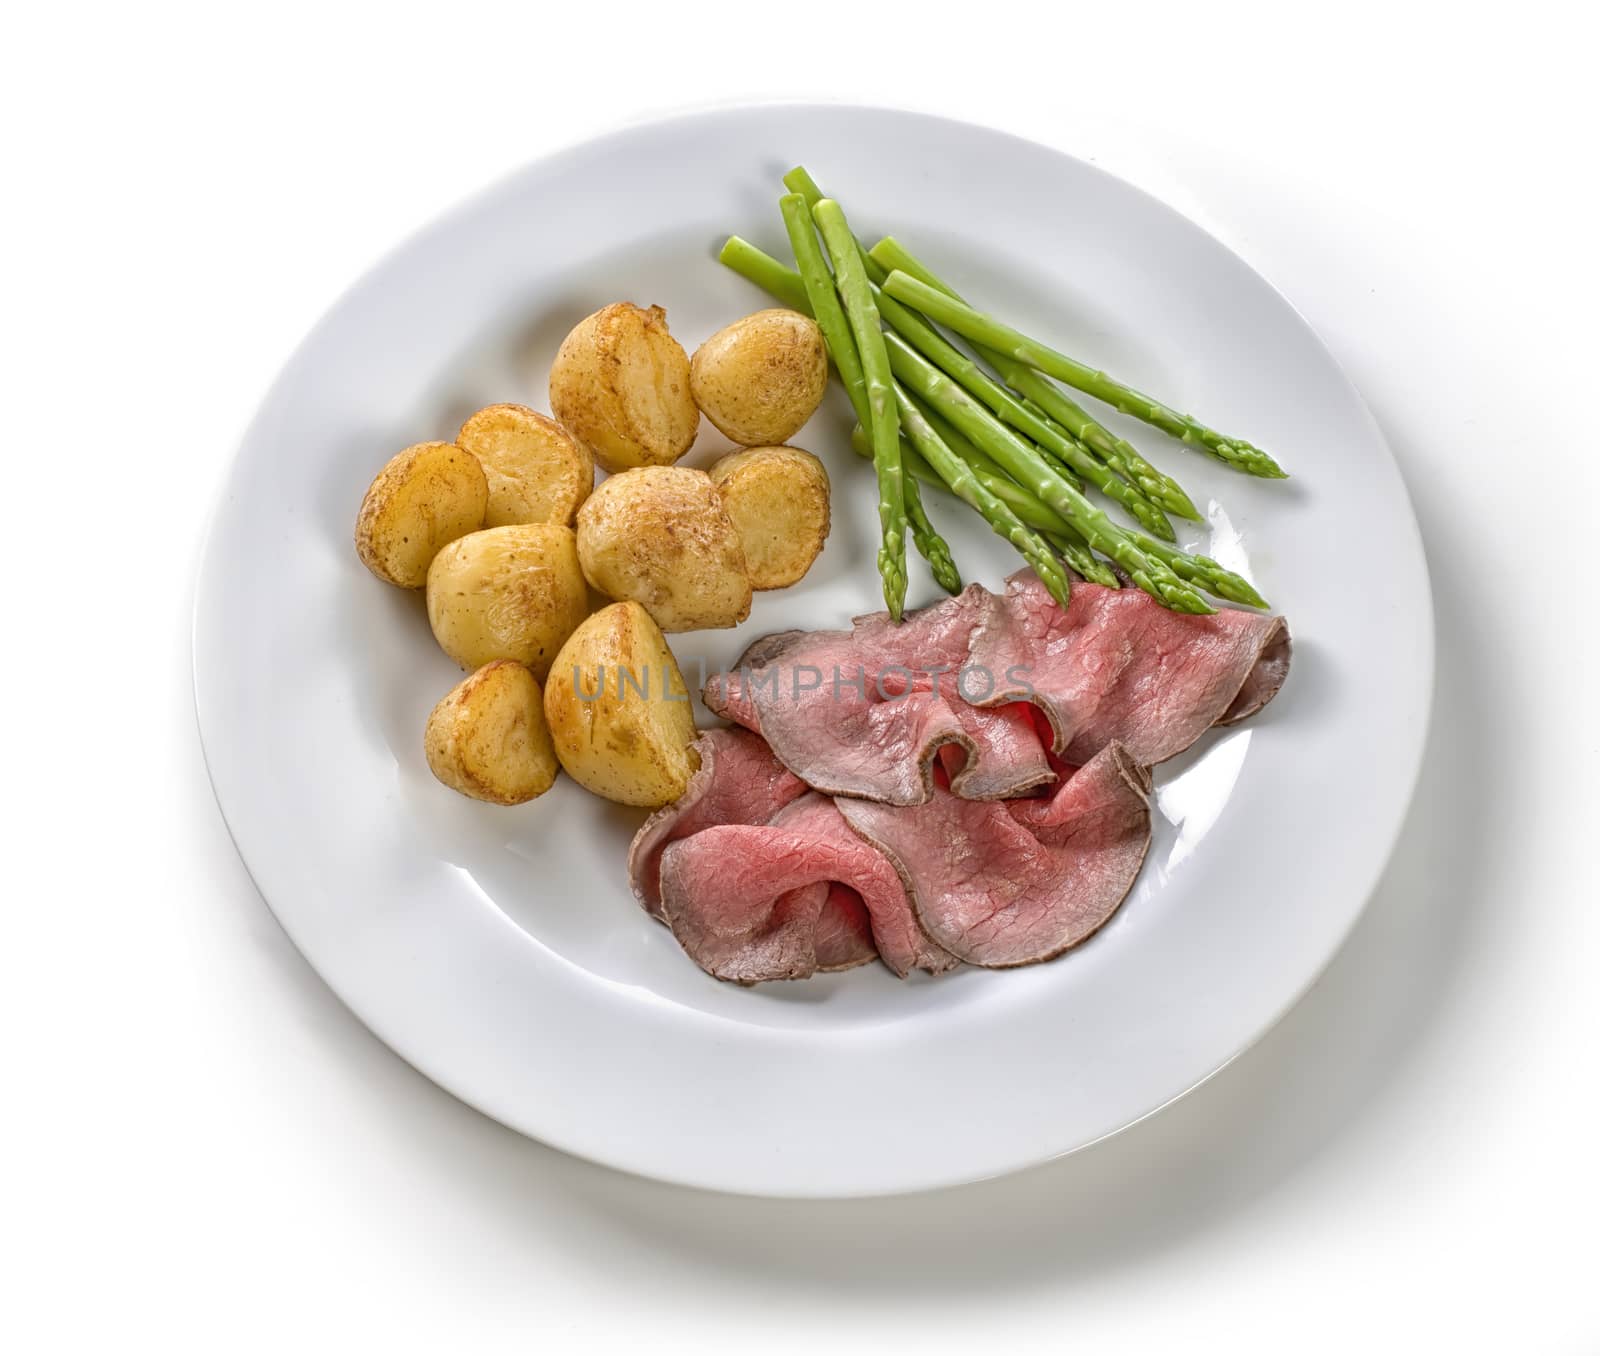 slices of roast beef with potatoes by janssenkruseproductions